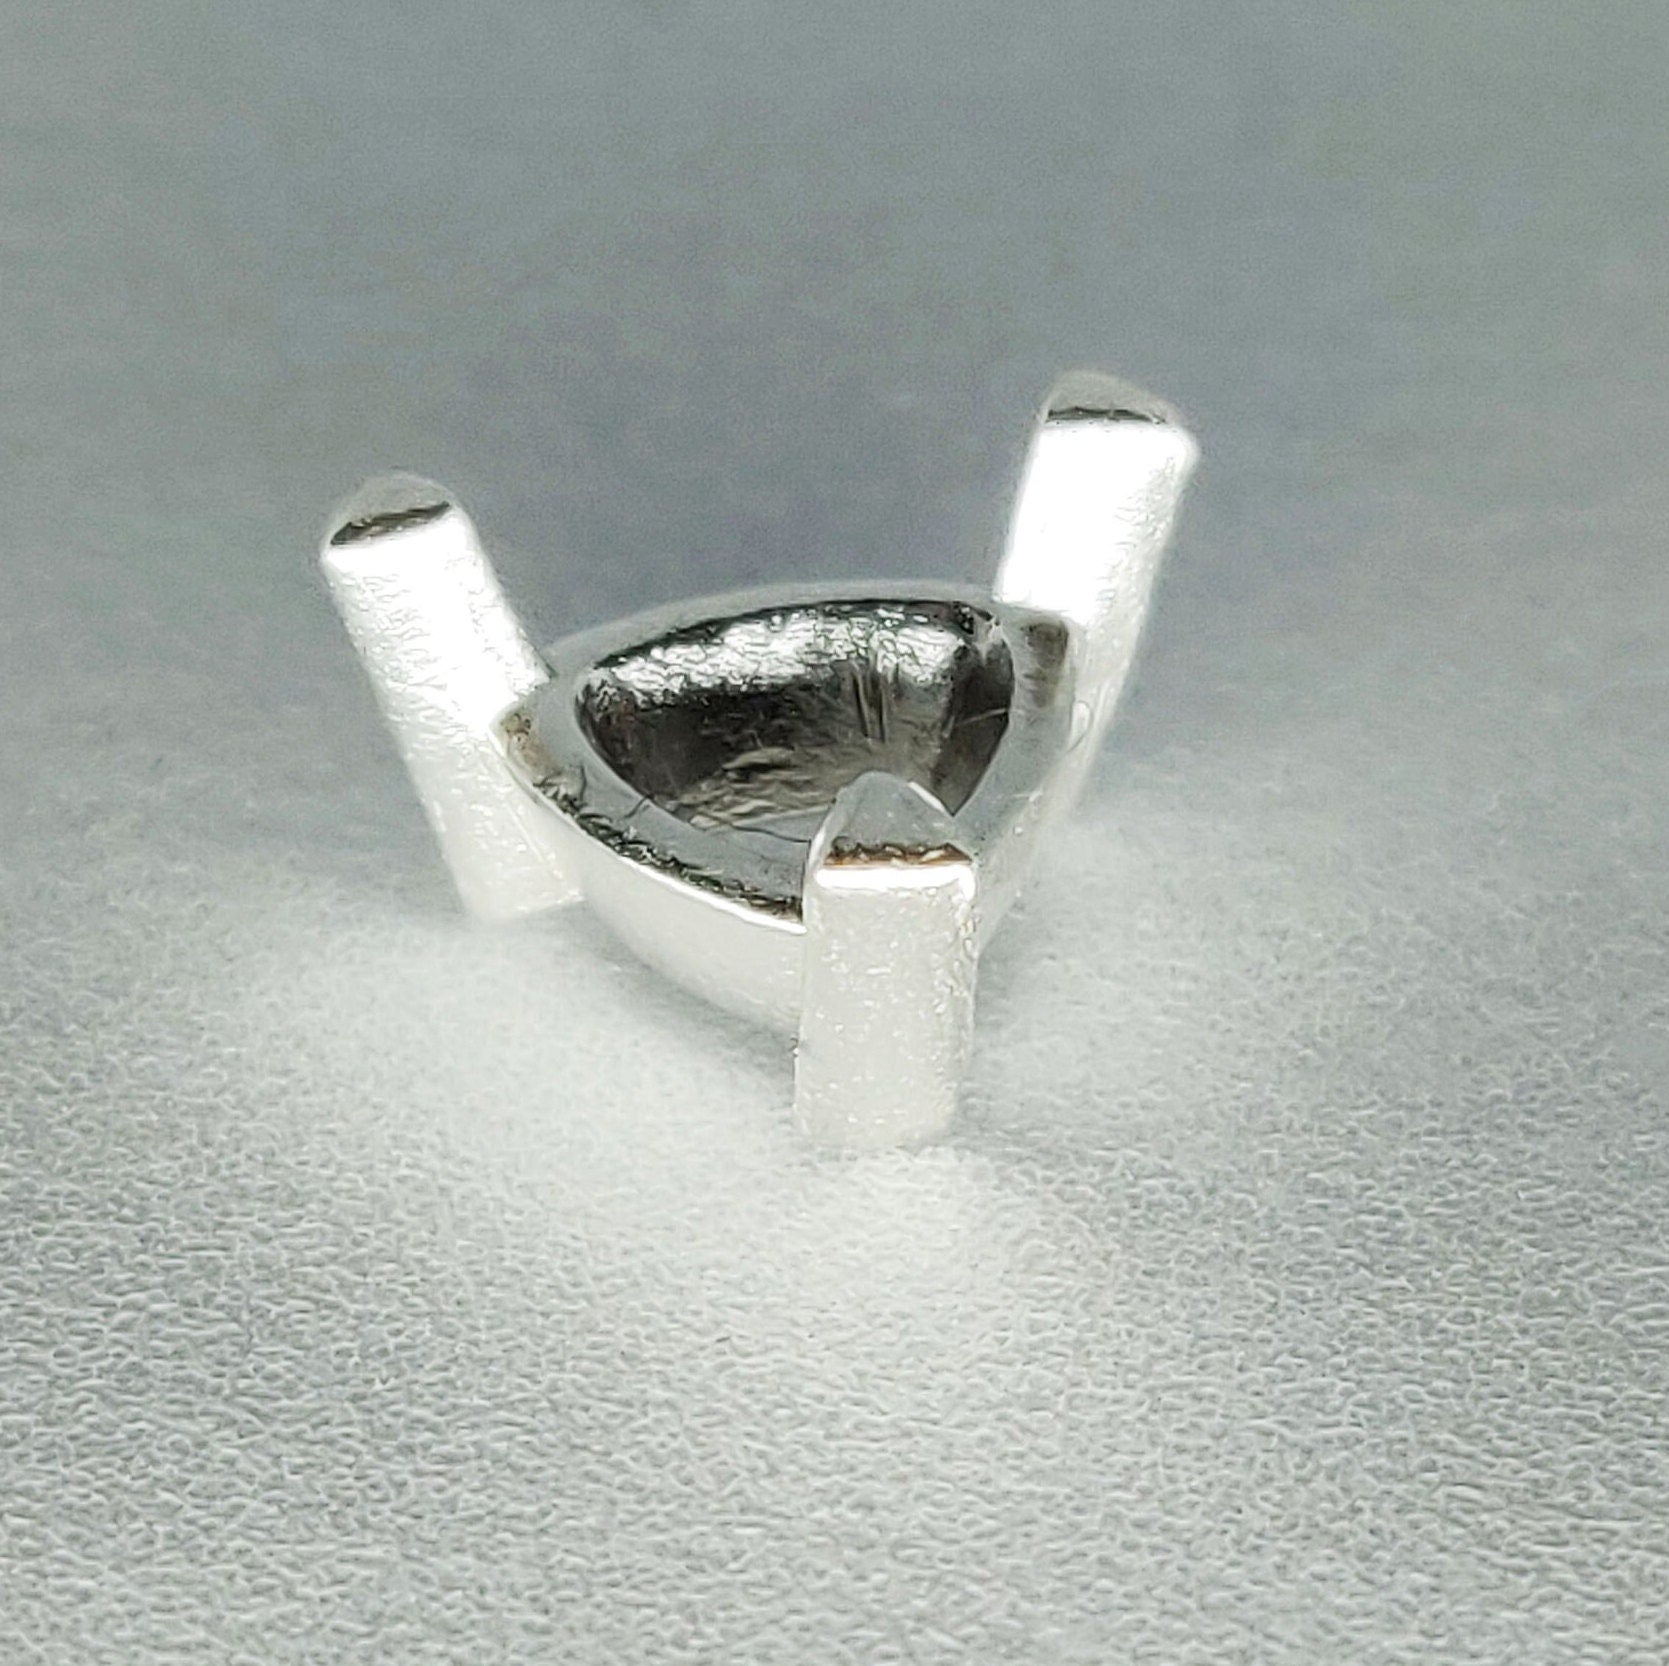 Profile view of a silver trillion prong setting on a white background.